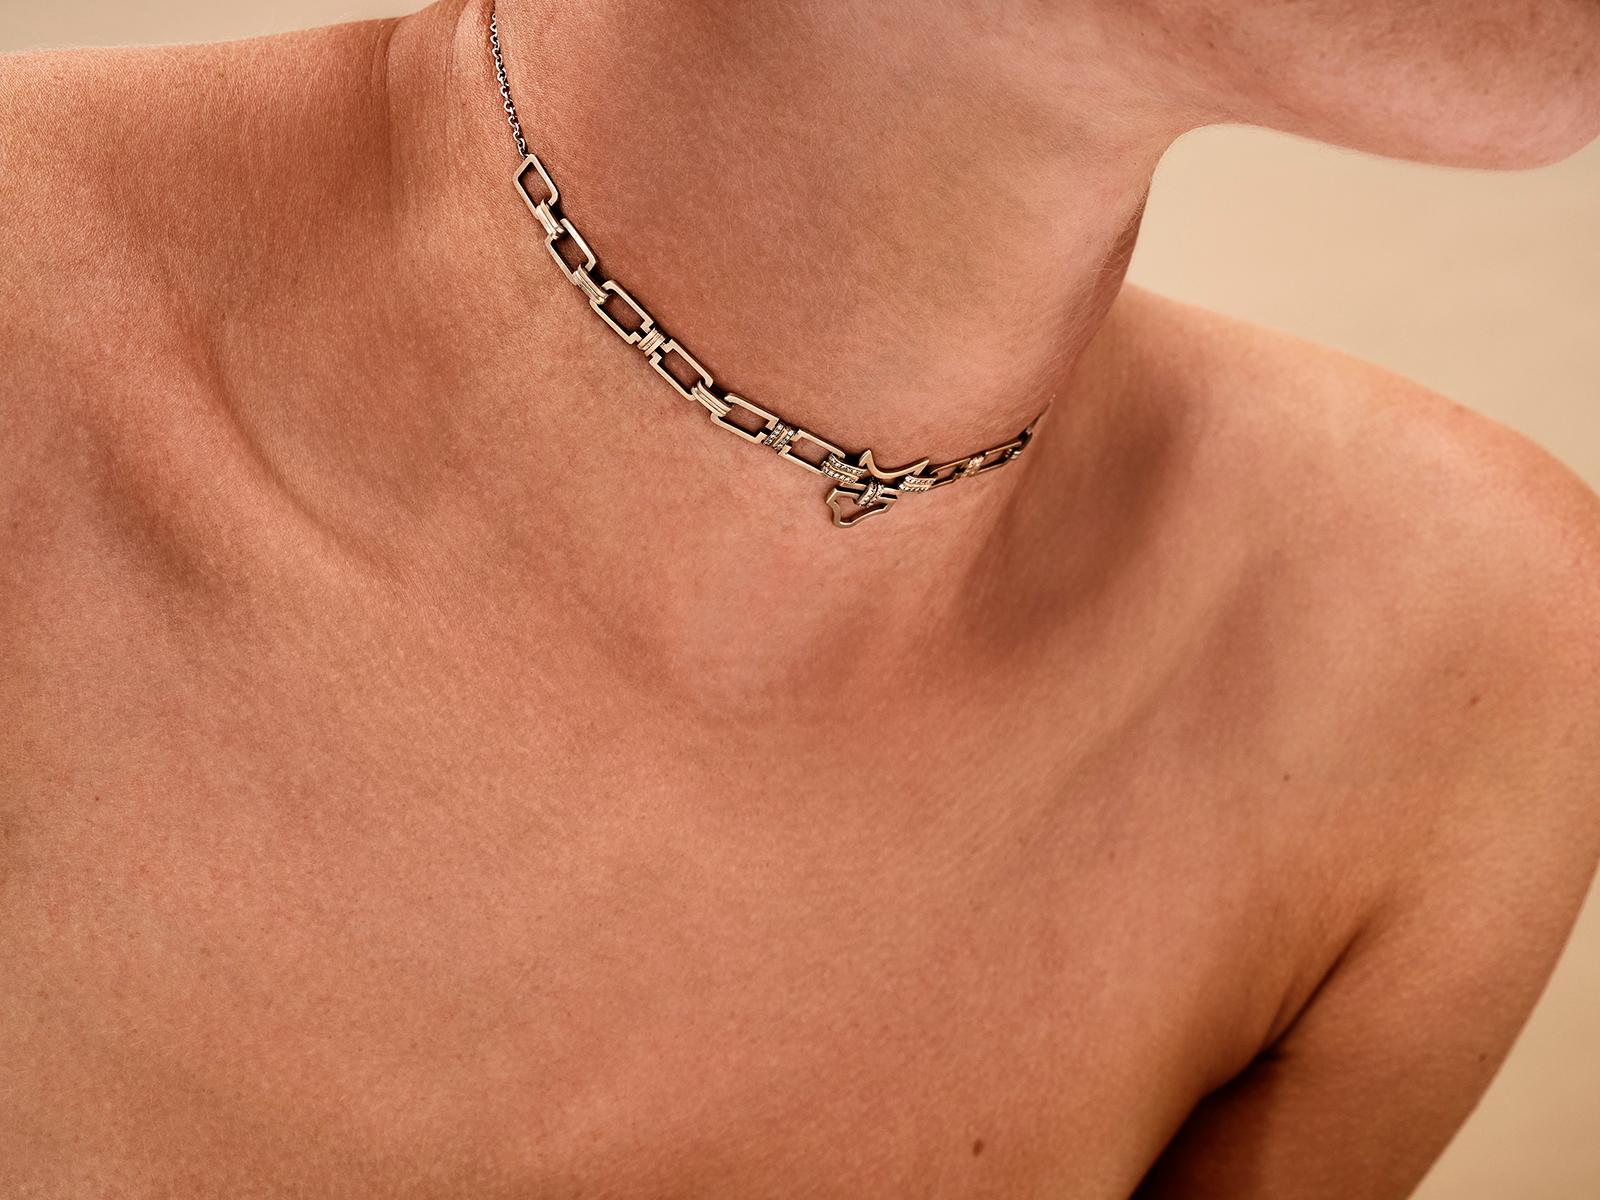 This necklace from POLINA ELLIS' ENOSIS-MINOTAVROS collection is handcrafted in 18K raw white gold with 0,09ct white brilliant cut diamonds.
It can be worn as a choker or looser around the neck.
Adjustable Length: 38 - 40cm